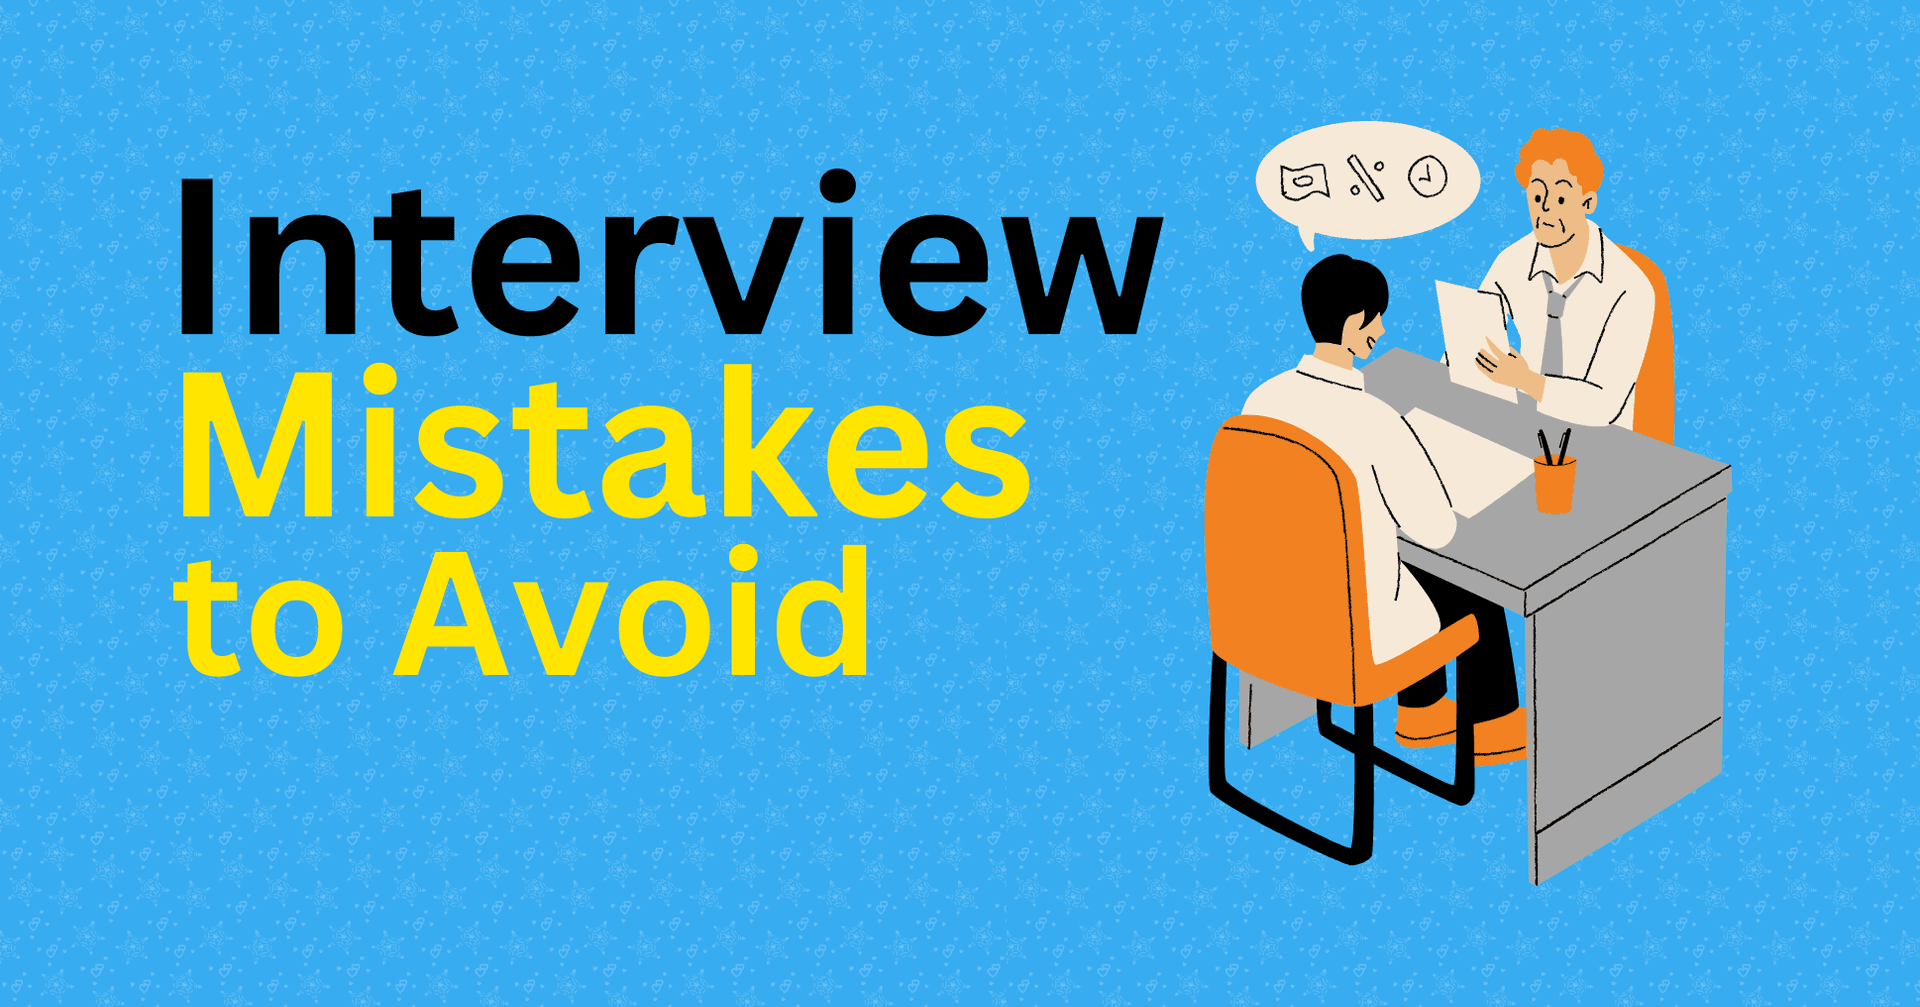 10 Common Job Interview Mistakes to Avoid in 2023